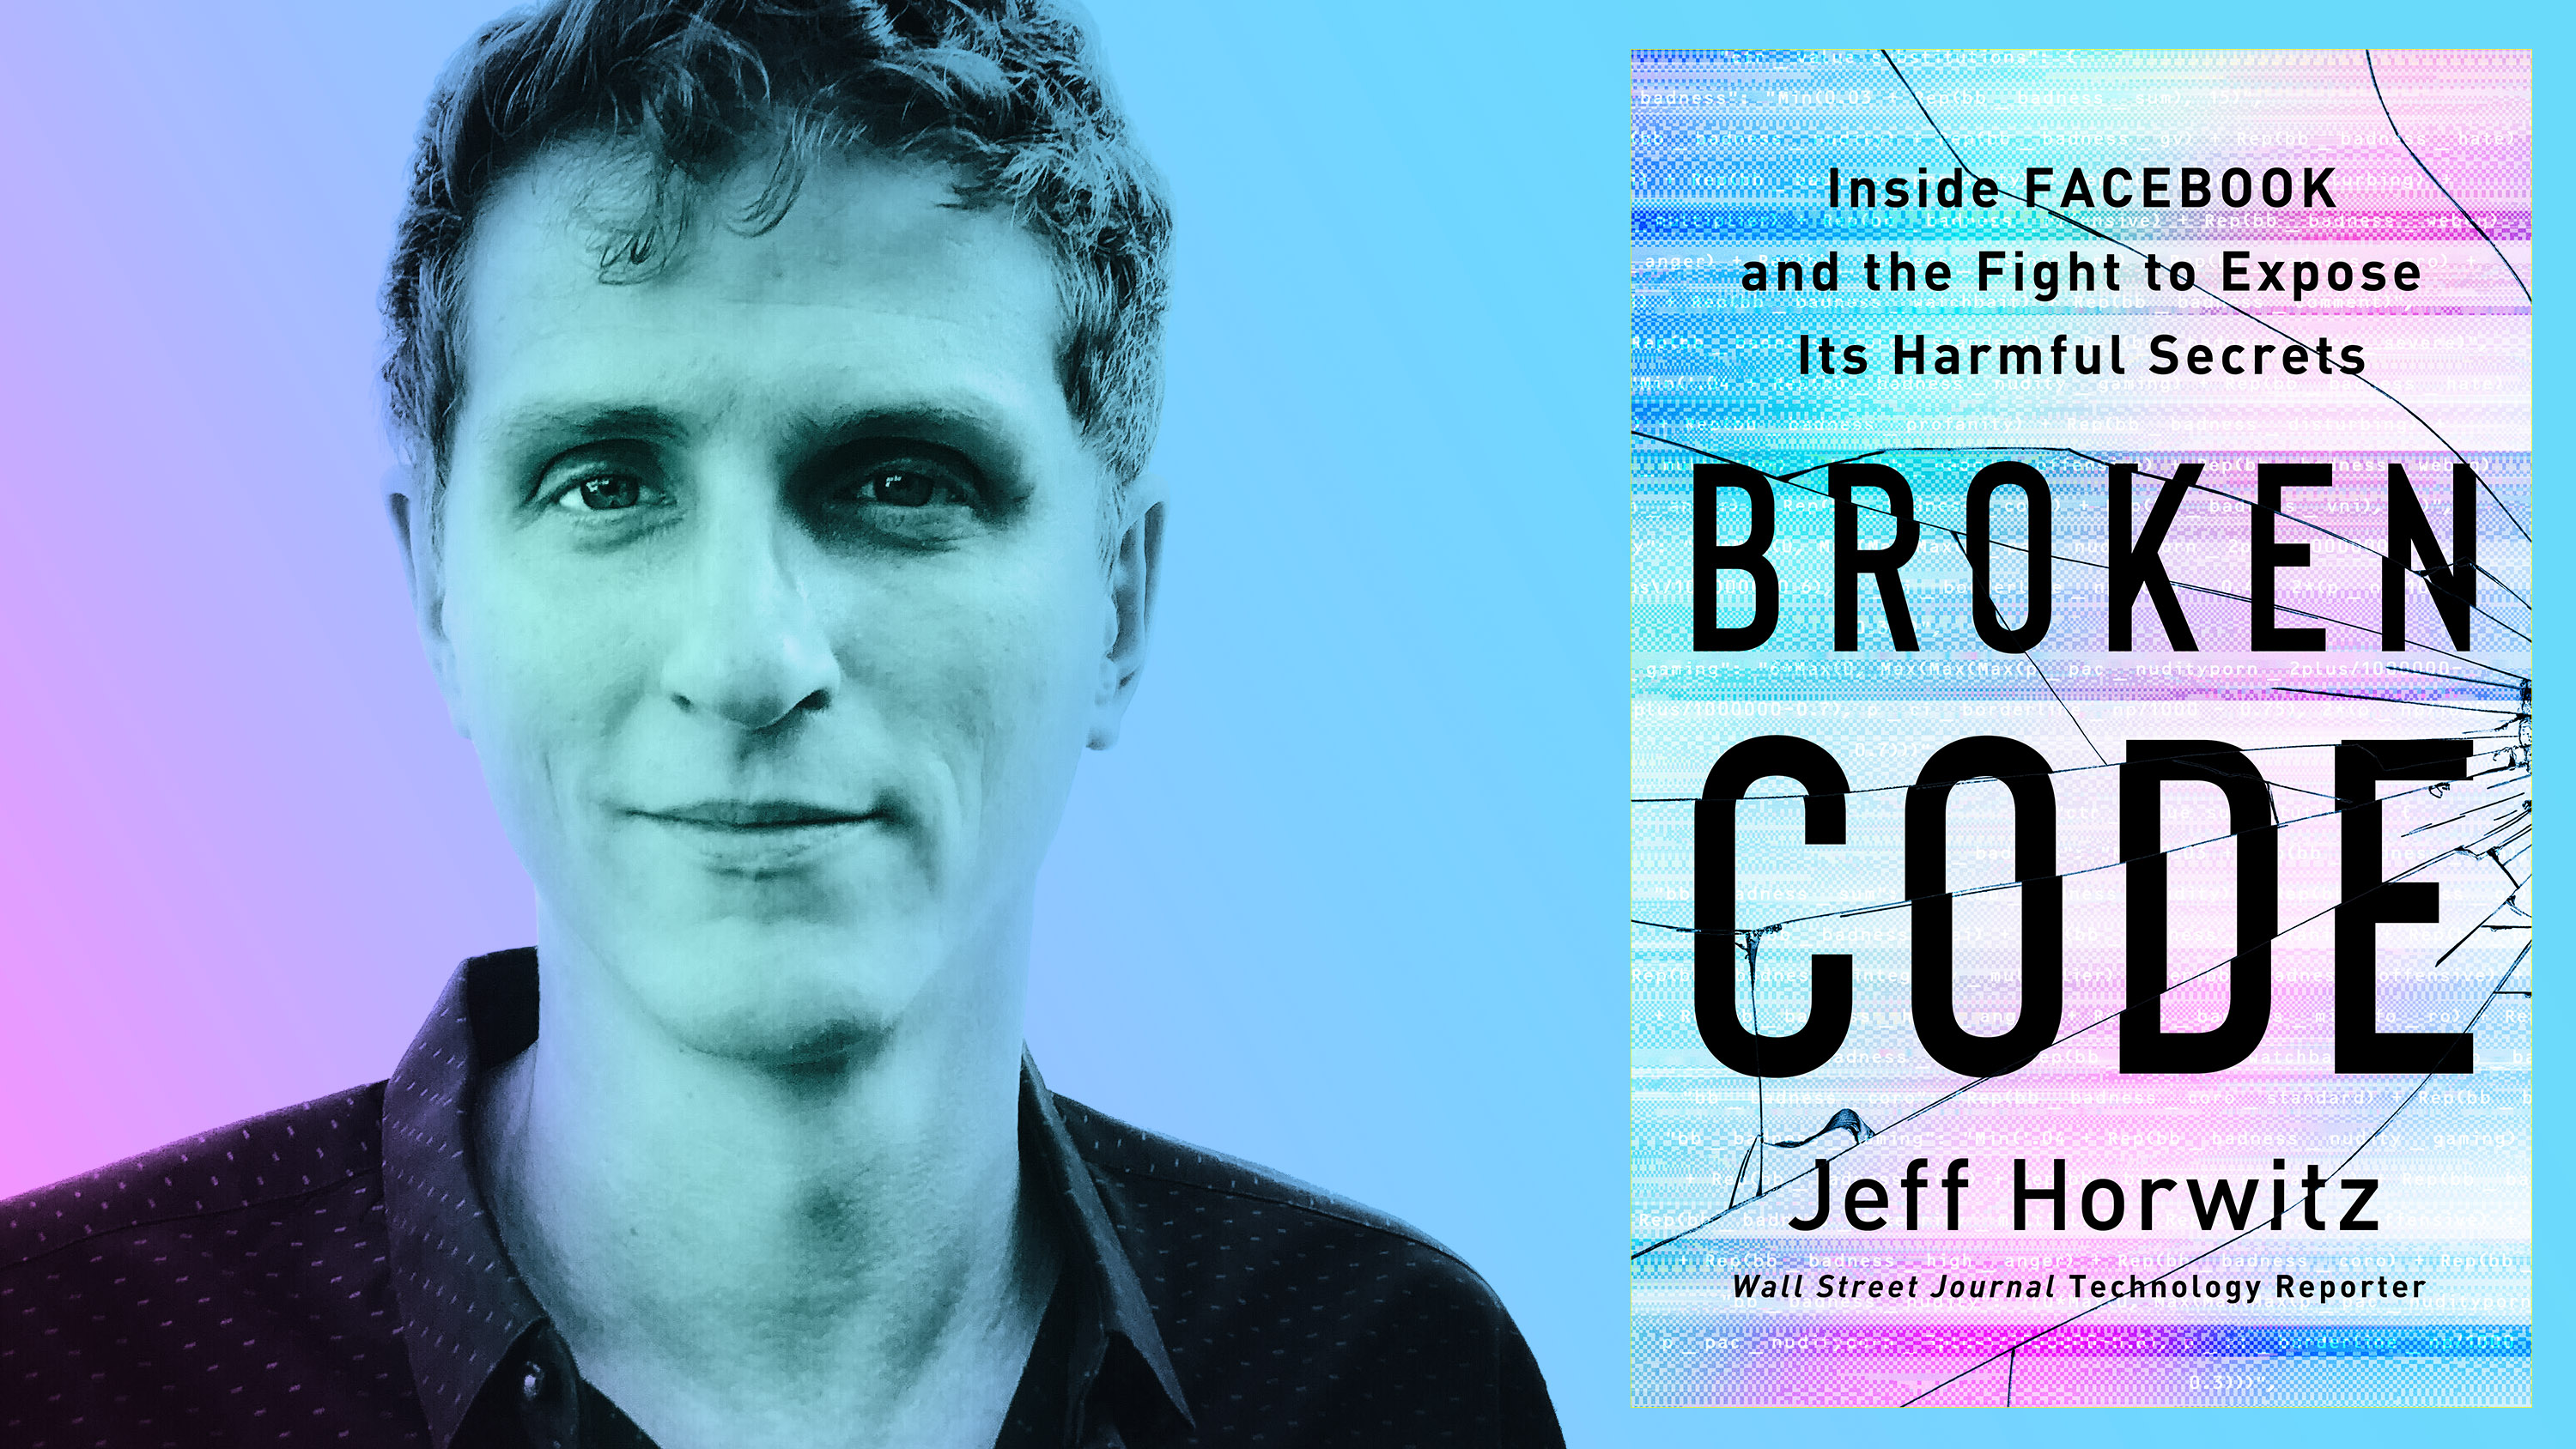 Jeff Horwitz and the cover of his book, Broken Code